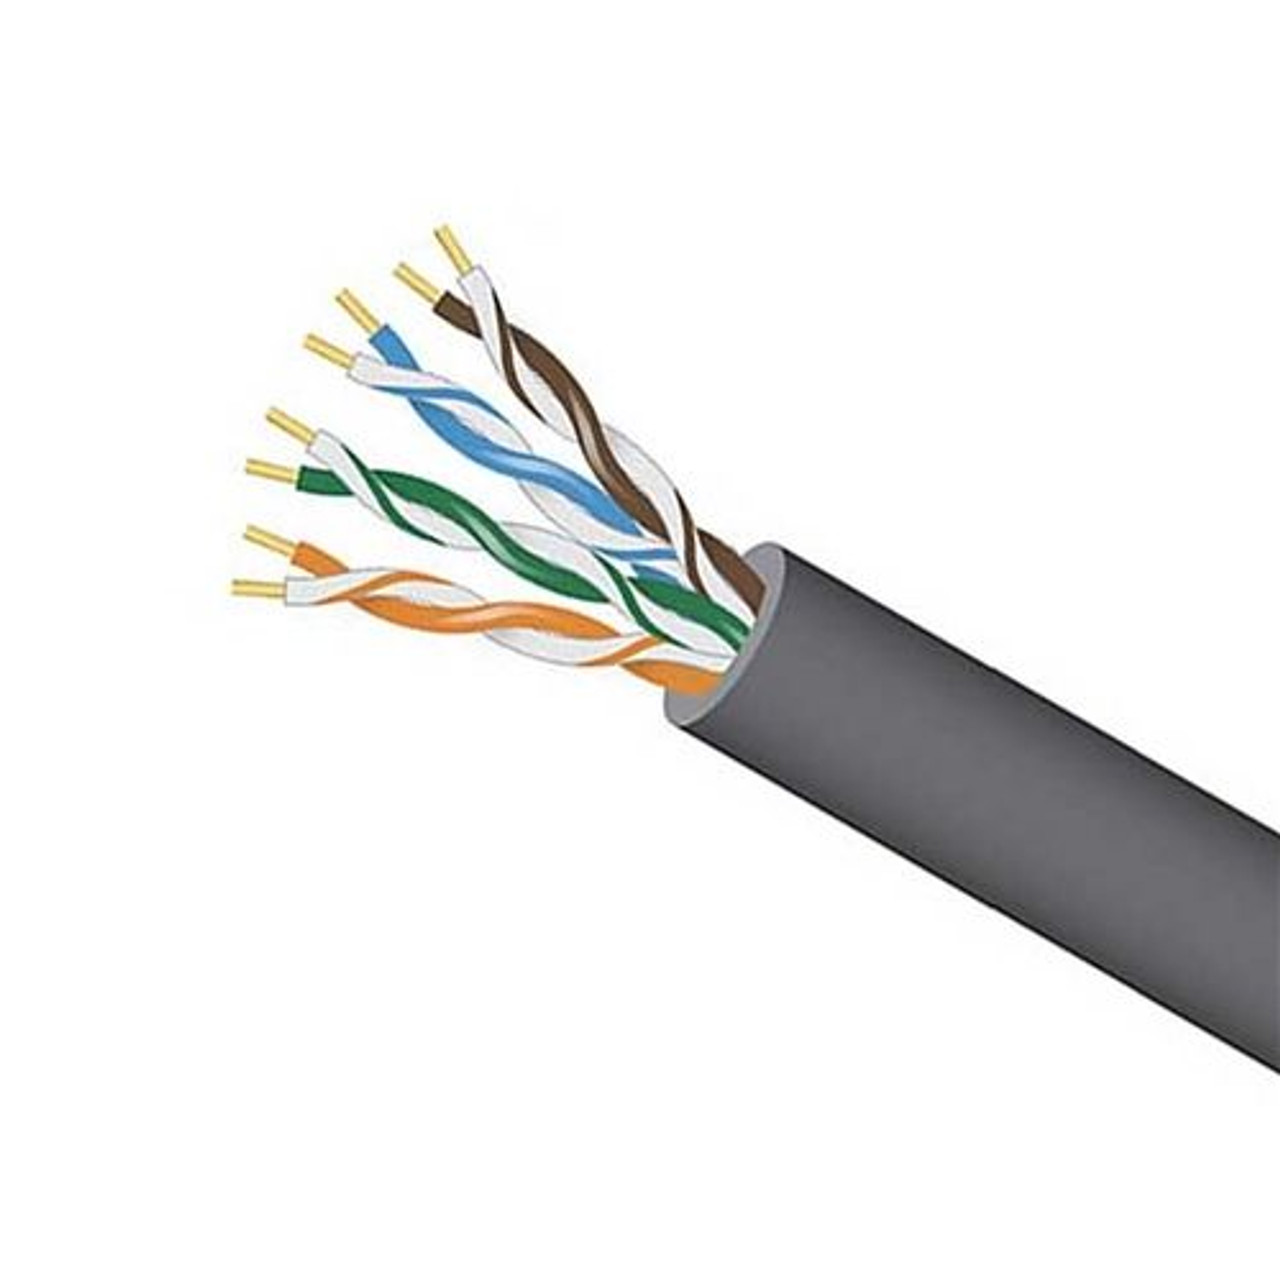 Steren 300-793GY 1000' FT CAT5E Cable Gray Plenum UTP CMP Ethernet 350 MHz Solid Copper 24 AWG Solid Copper Conductors Certified High Speed Ethernet Computer CAT5E Data Transfer